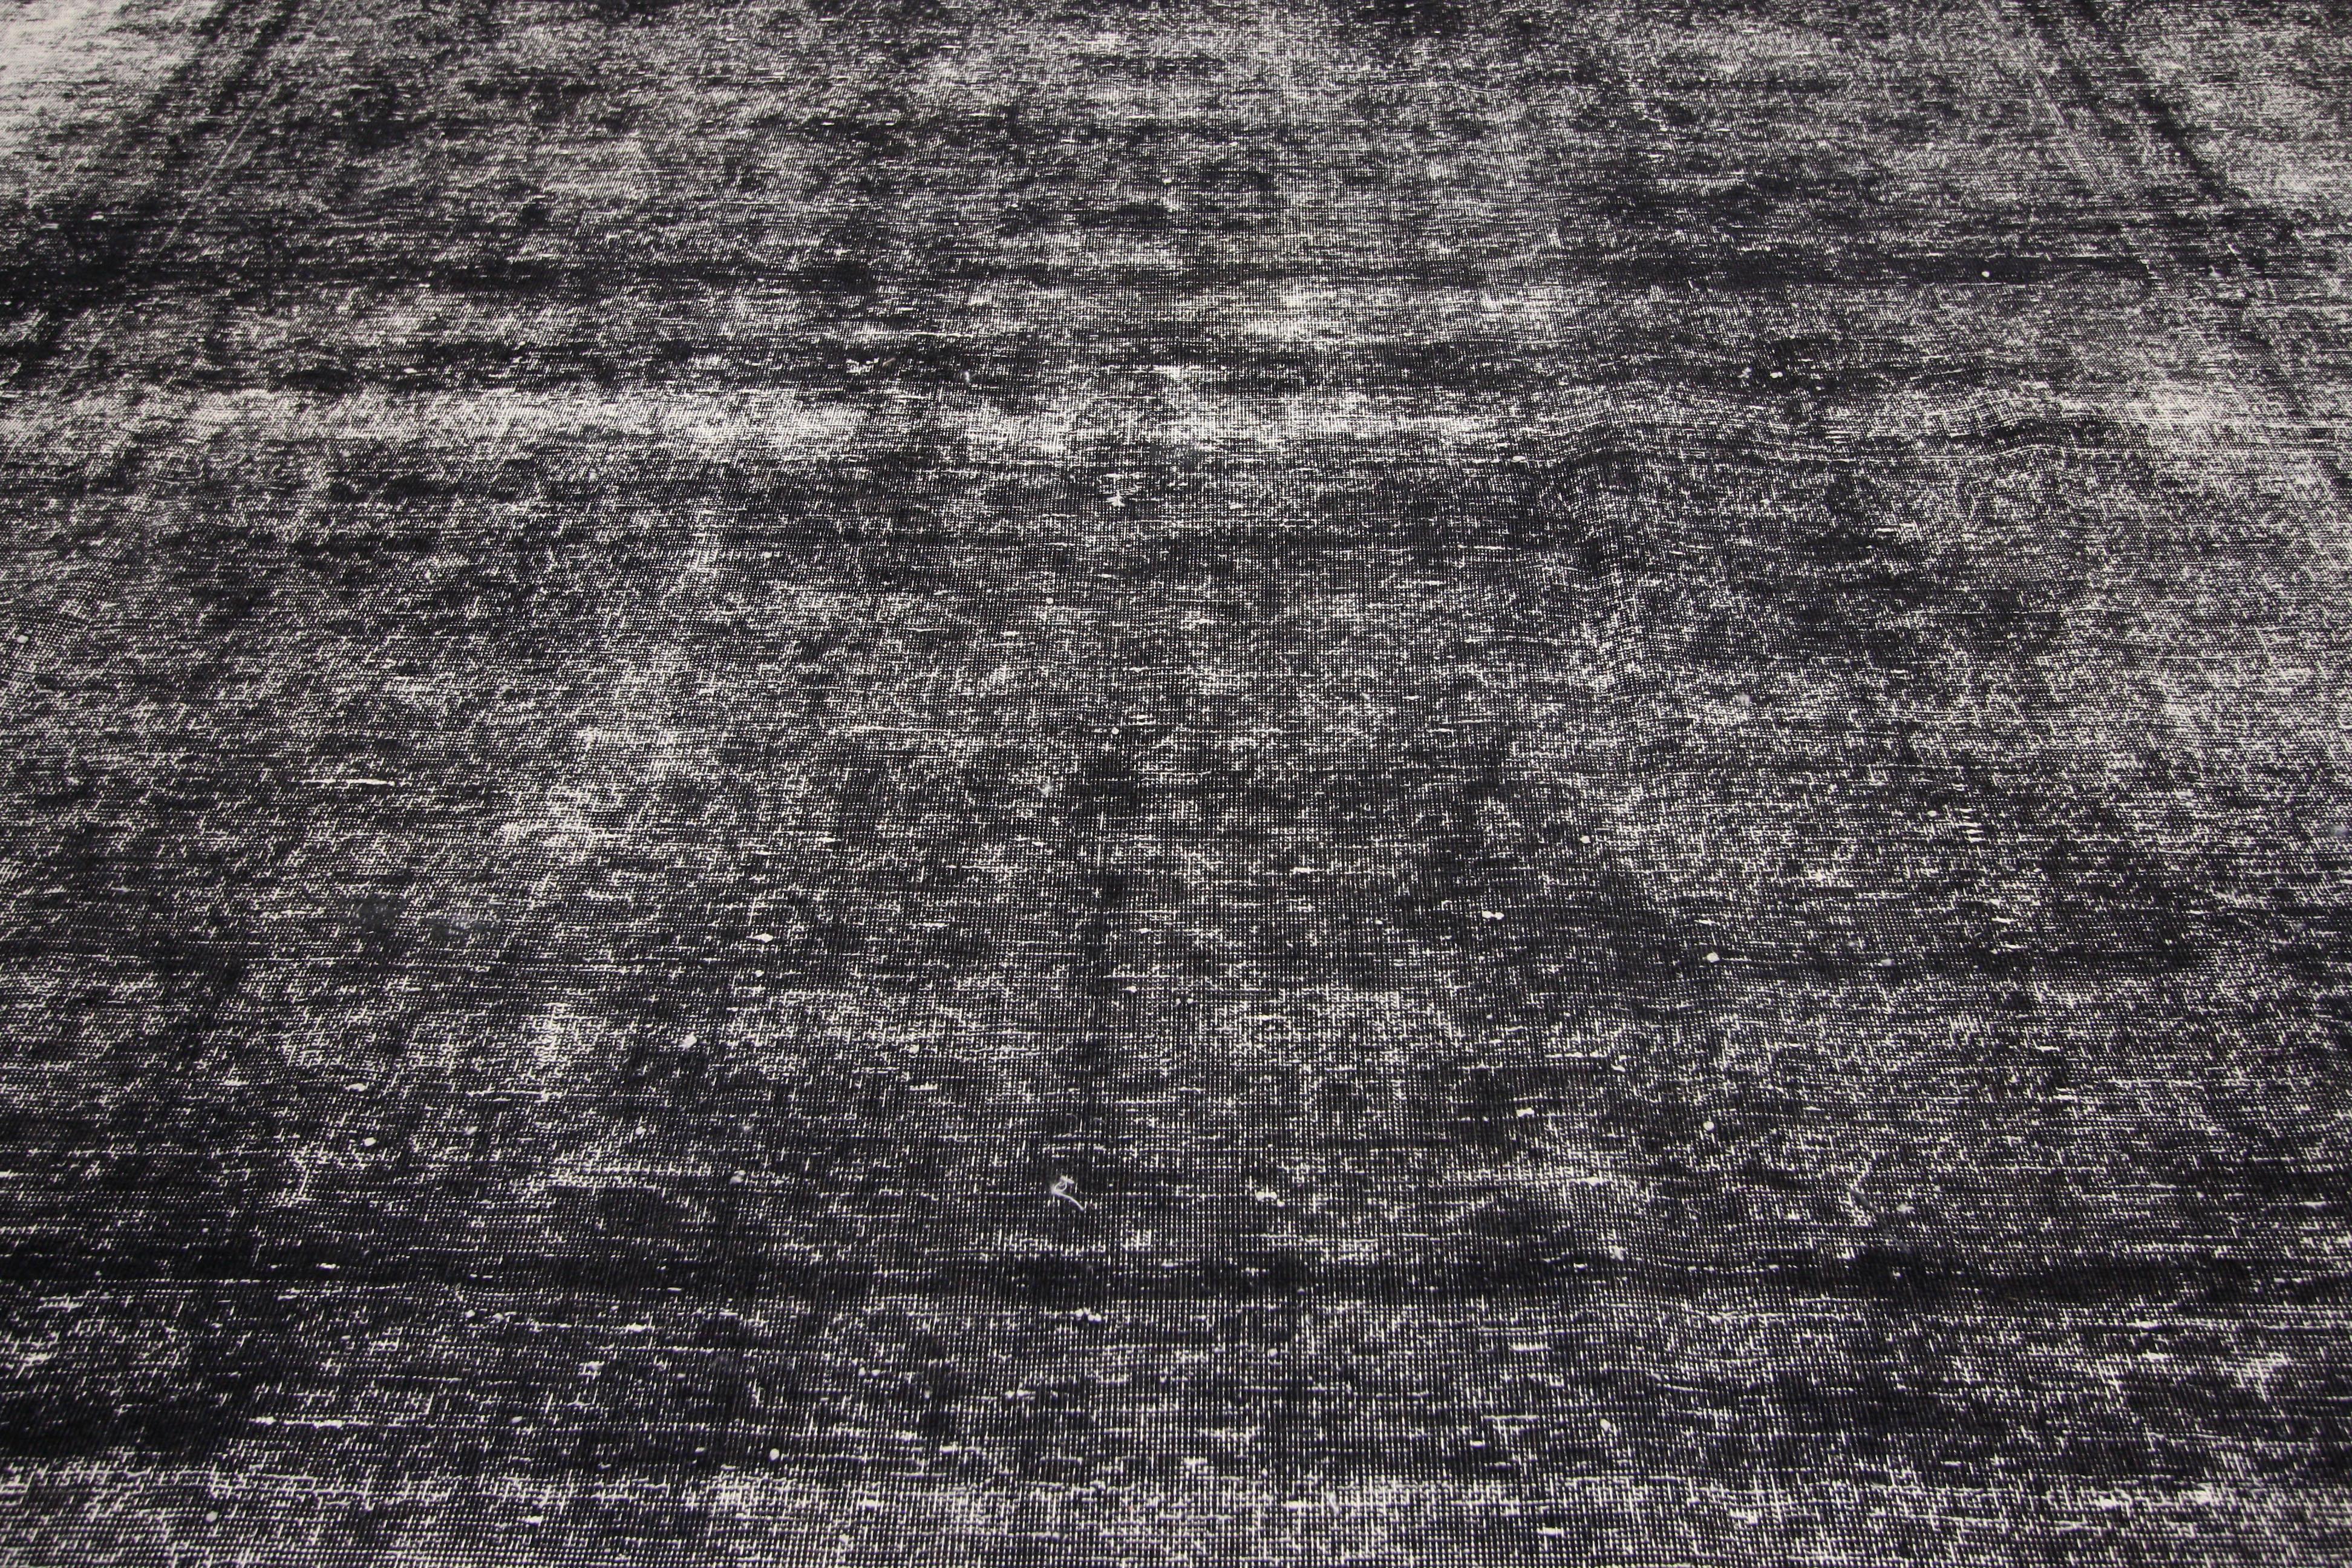 60693 Black Overdyed Distressed Vintage Turkish Rug with Modern Industrial Luxe Style. Defined and raw combined with utilitarian luxe appeal, this distressed overdyed vintage Turkish rug goes beyond the boundaries of design with historical richness